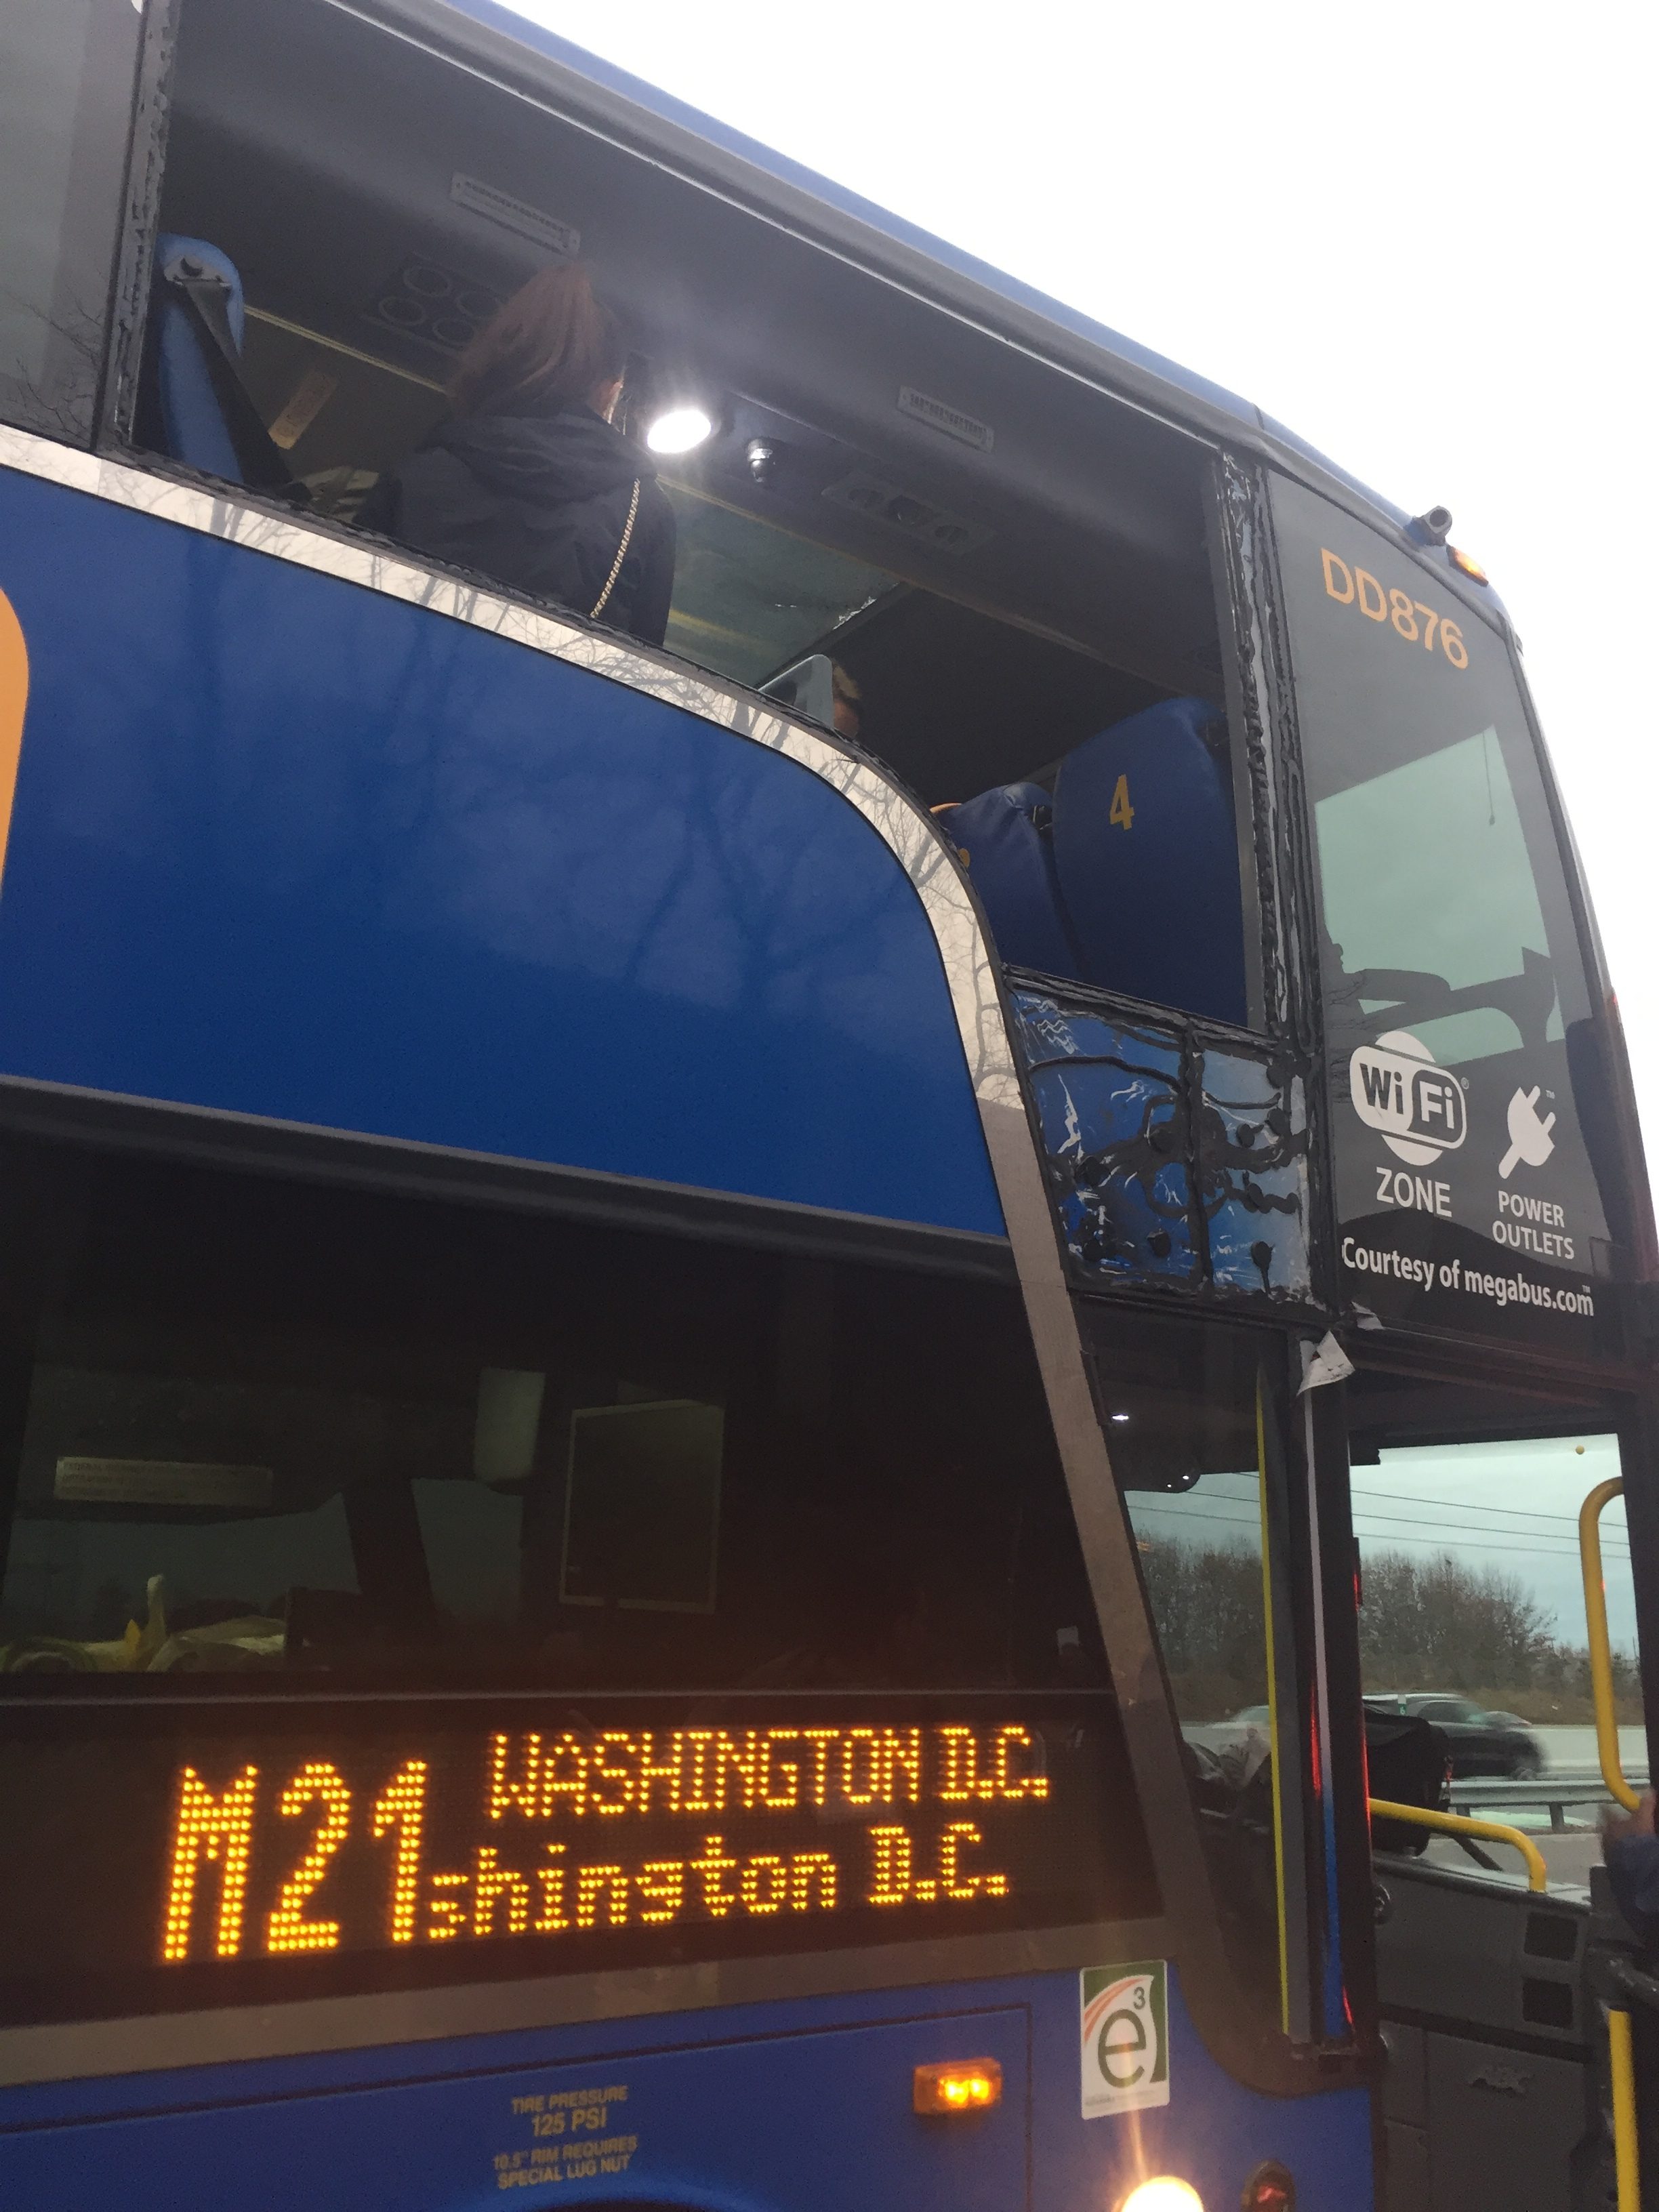 What are some money-saving tips when traveling on Megabus?